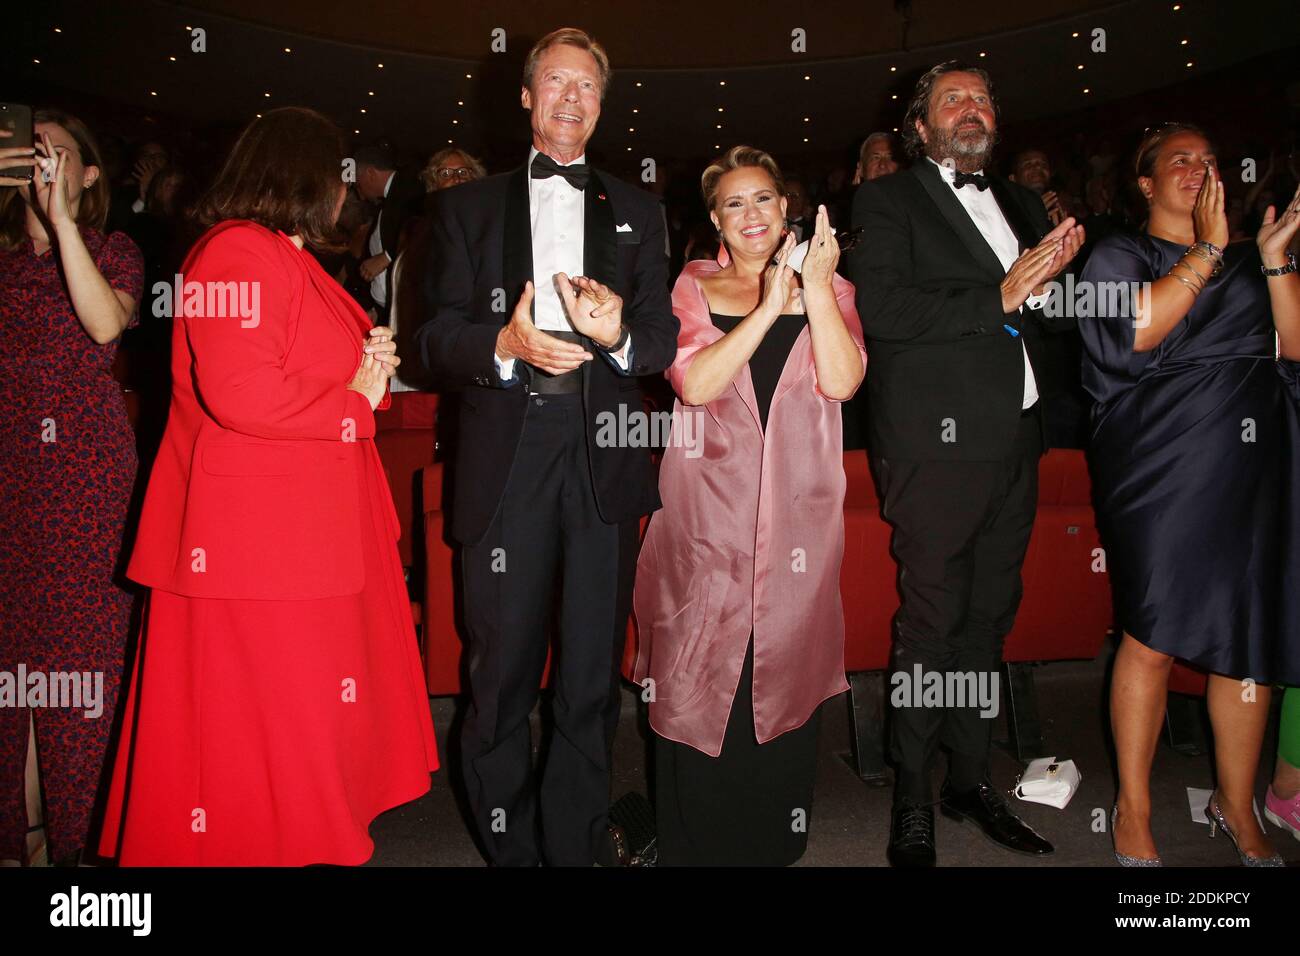 Grand Duke Henri of Luxembourg, Grand Duchess Maria Teresa of Luxembourg attending the closing ceremony of the 12th Angouleme Film Festival in Angouleme, France on August 25, 2019. Photo by Jerome Domine/ABACAPRESS.COM Stock Photo